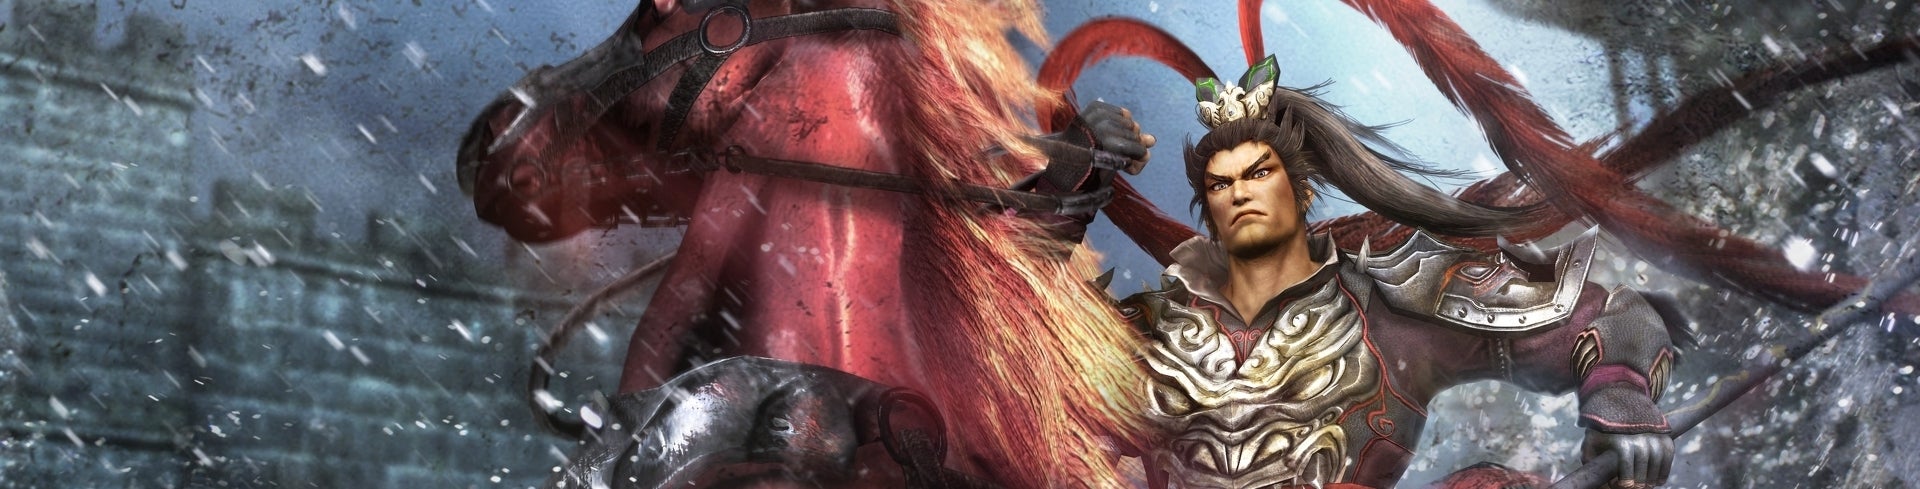 Immagine di Dynasty Warriors 8: Xtreme Legends Complete Edition - review